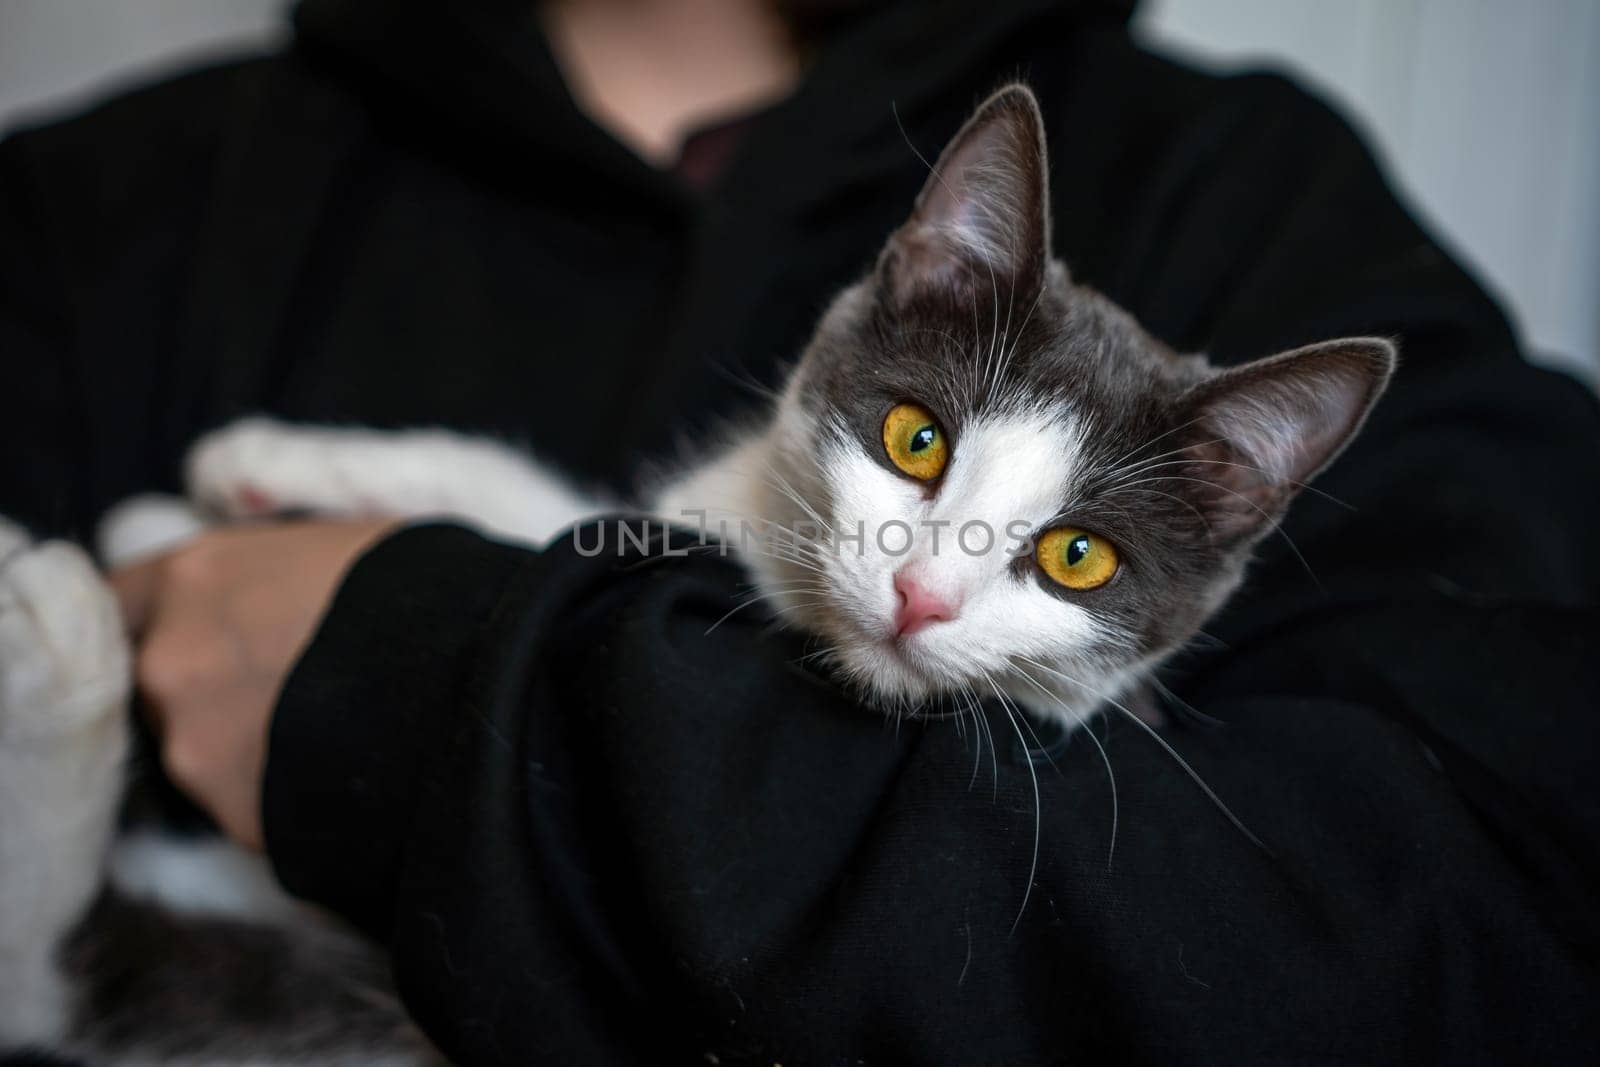 A woman is holding a kitten in her arms. The kitten is gray and white. The woman is wearing a black hoodie